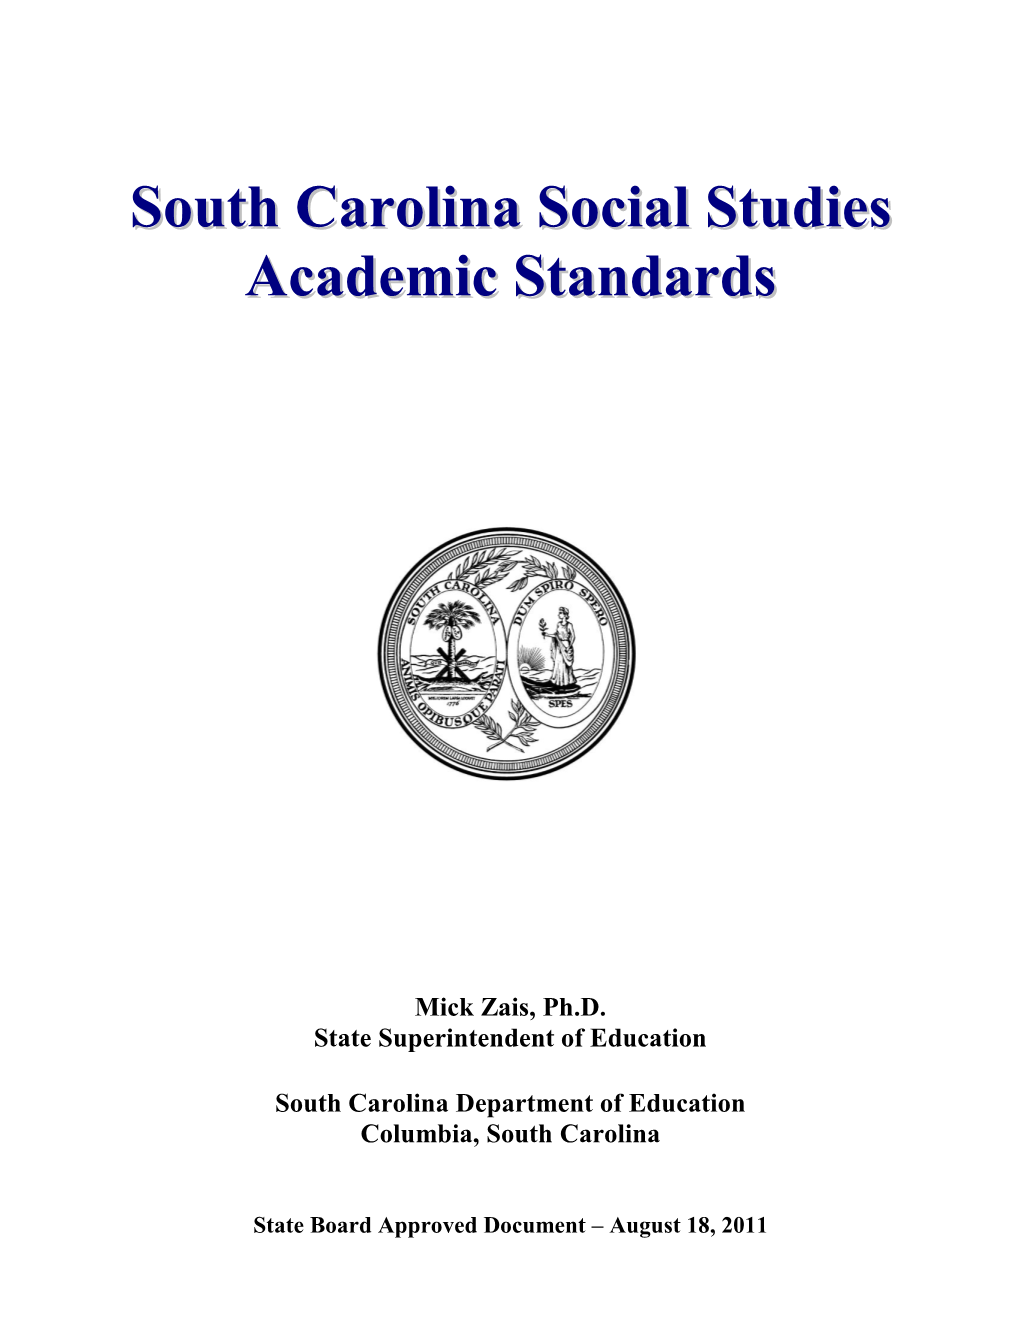 South Carolina Social Studies Standards Document Has Been Modified from the 2005 Document in the Following Ways: A